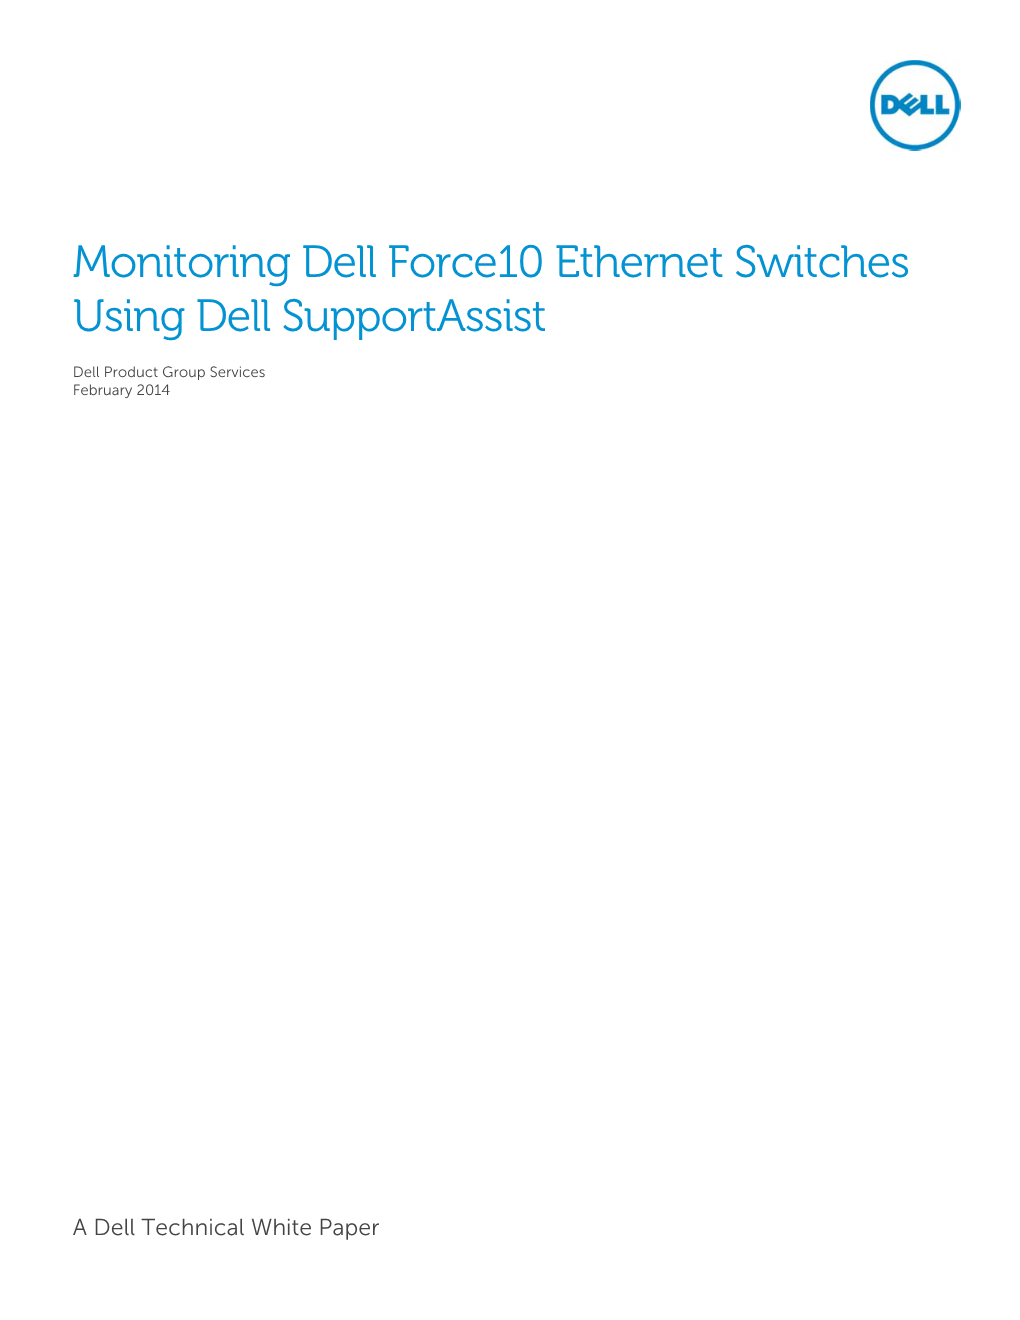 Monitoring Dell Force10 Ethernet Switches Using Dell Supportassist